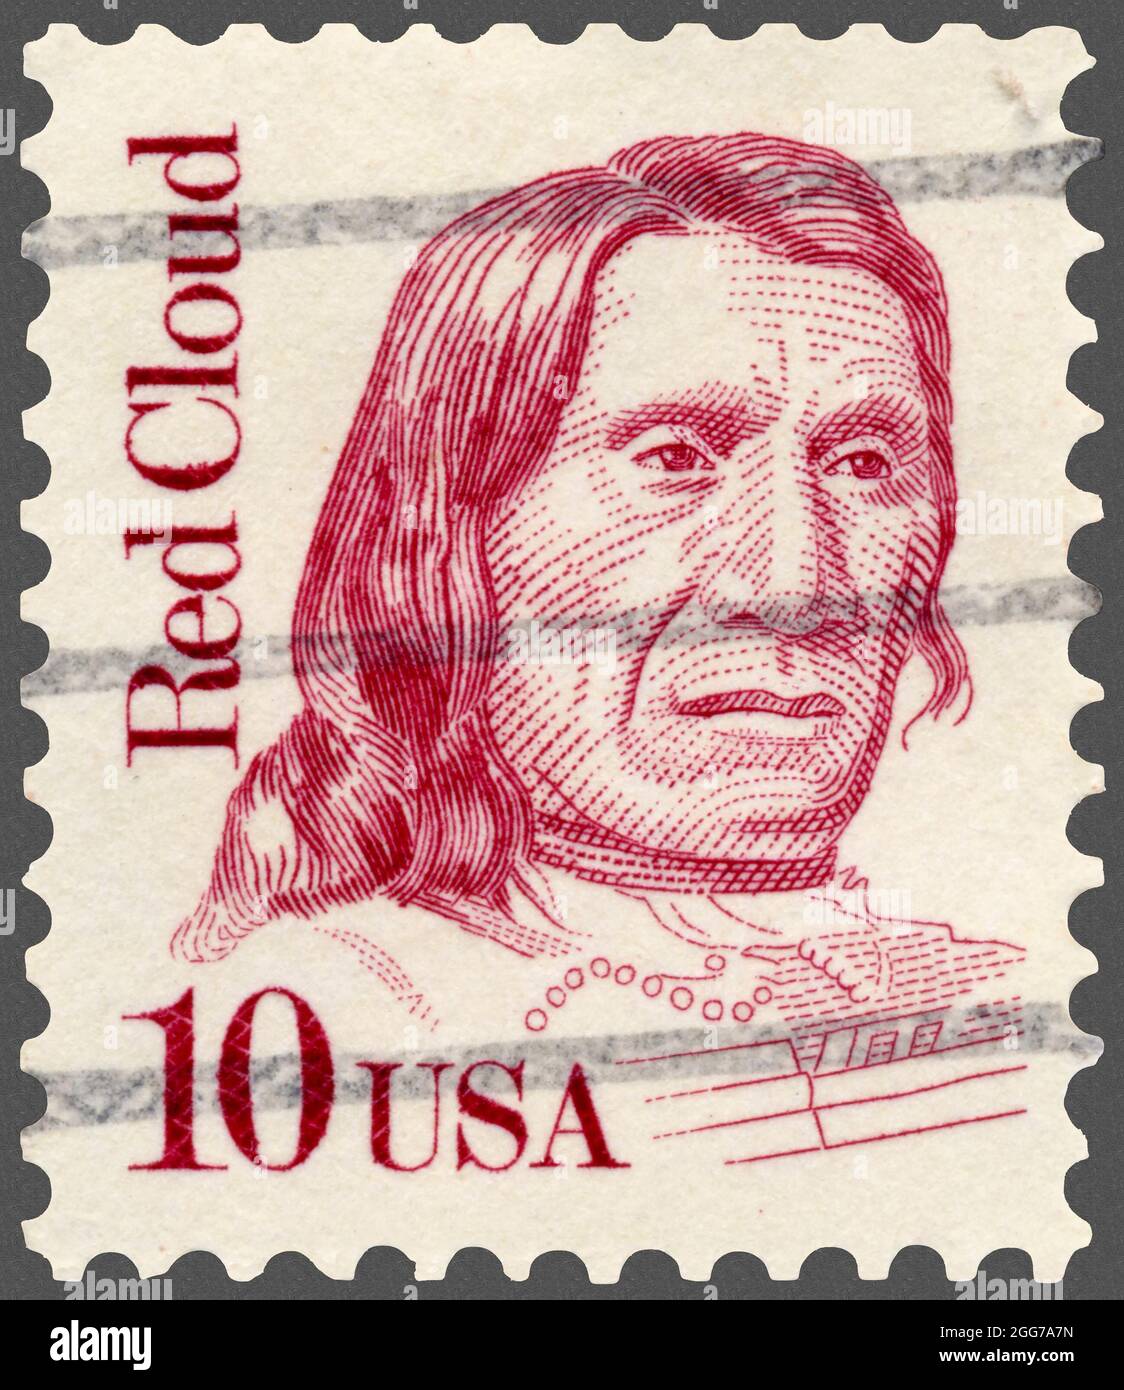 Oglala Lakota Indian warrior Red Cloud depicted on 1987 postage stamp part of the Great Americans series. Stock Photo